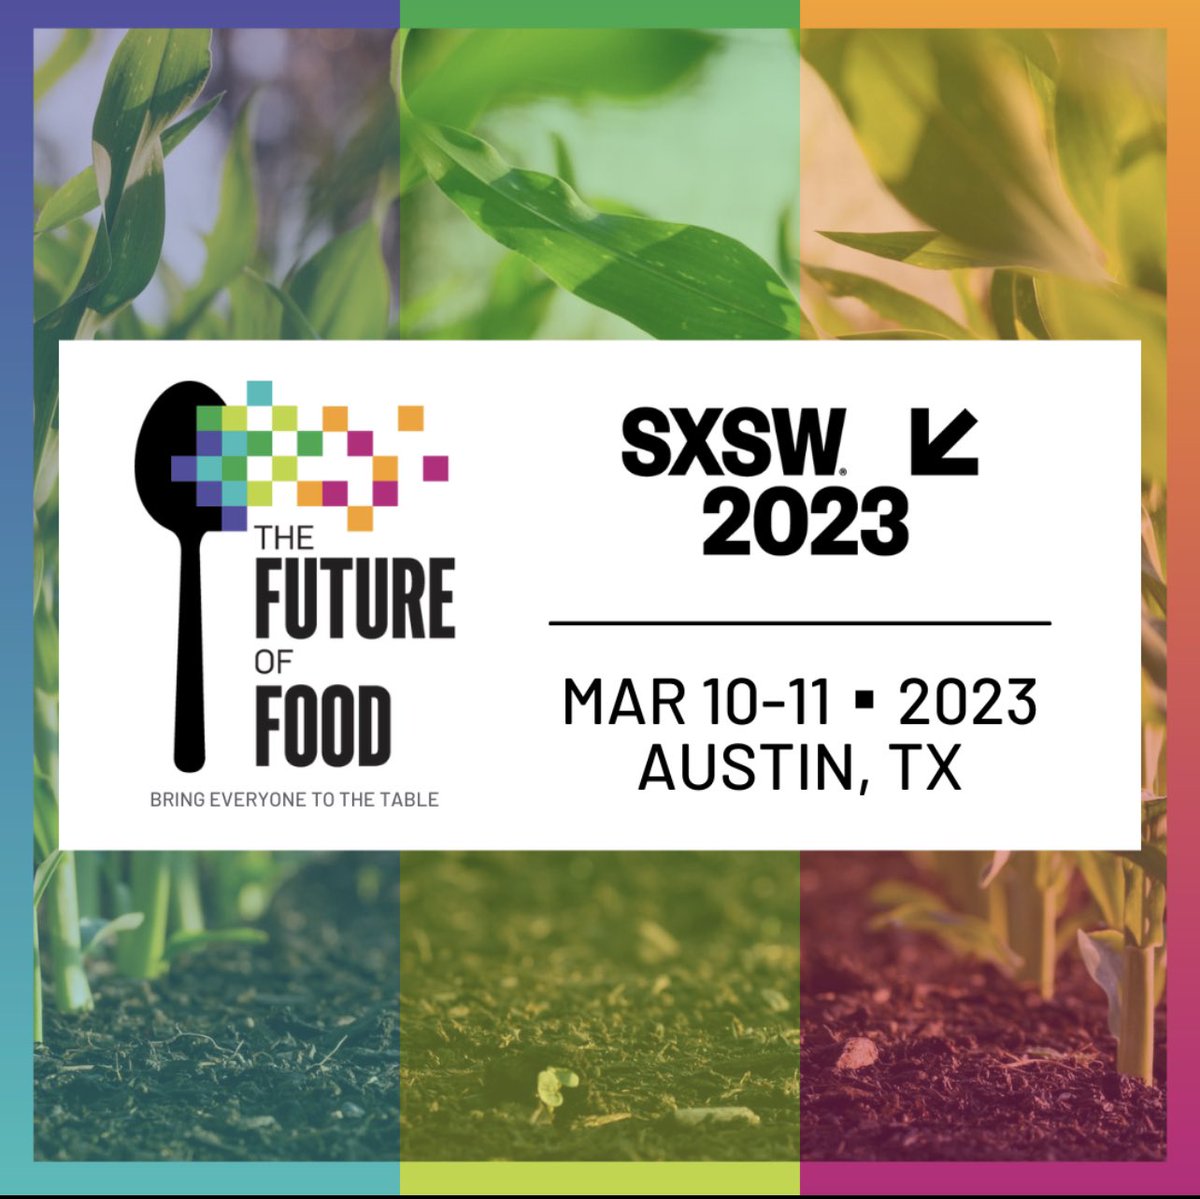 @nickgraynews @ellebeecher Next Sat, bring the group on over to #FutureFoodSXSW at 1400 Lavaca - delightful discussions, inspiring entrepreneurs, future farmers & more! 

We’d love to have y’all join the party :D

#Free in-person & live-streaming

#FoFSXSW #FutureOfFood #ZHZW

RSVP bit.ly/fofsxsw2023